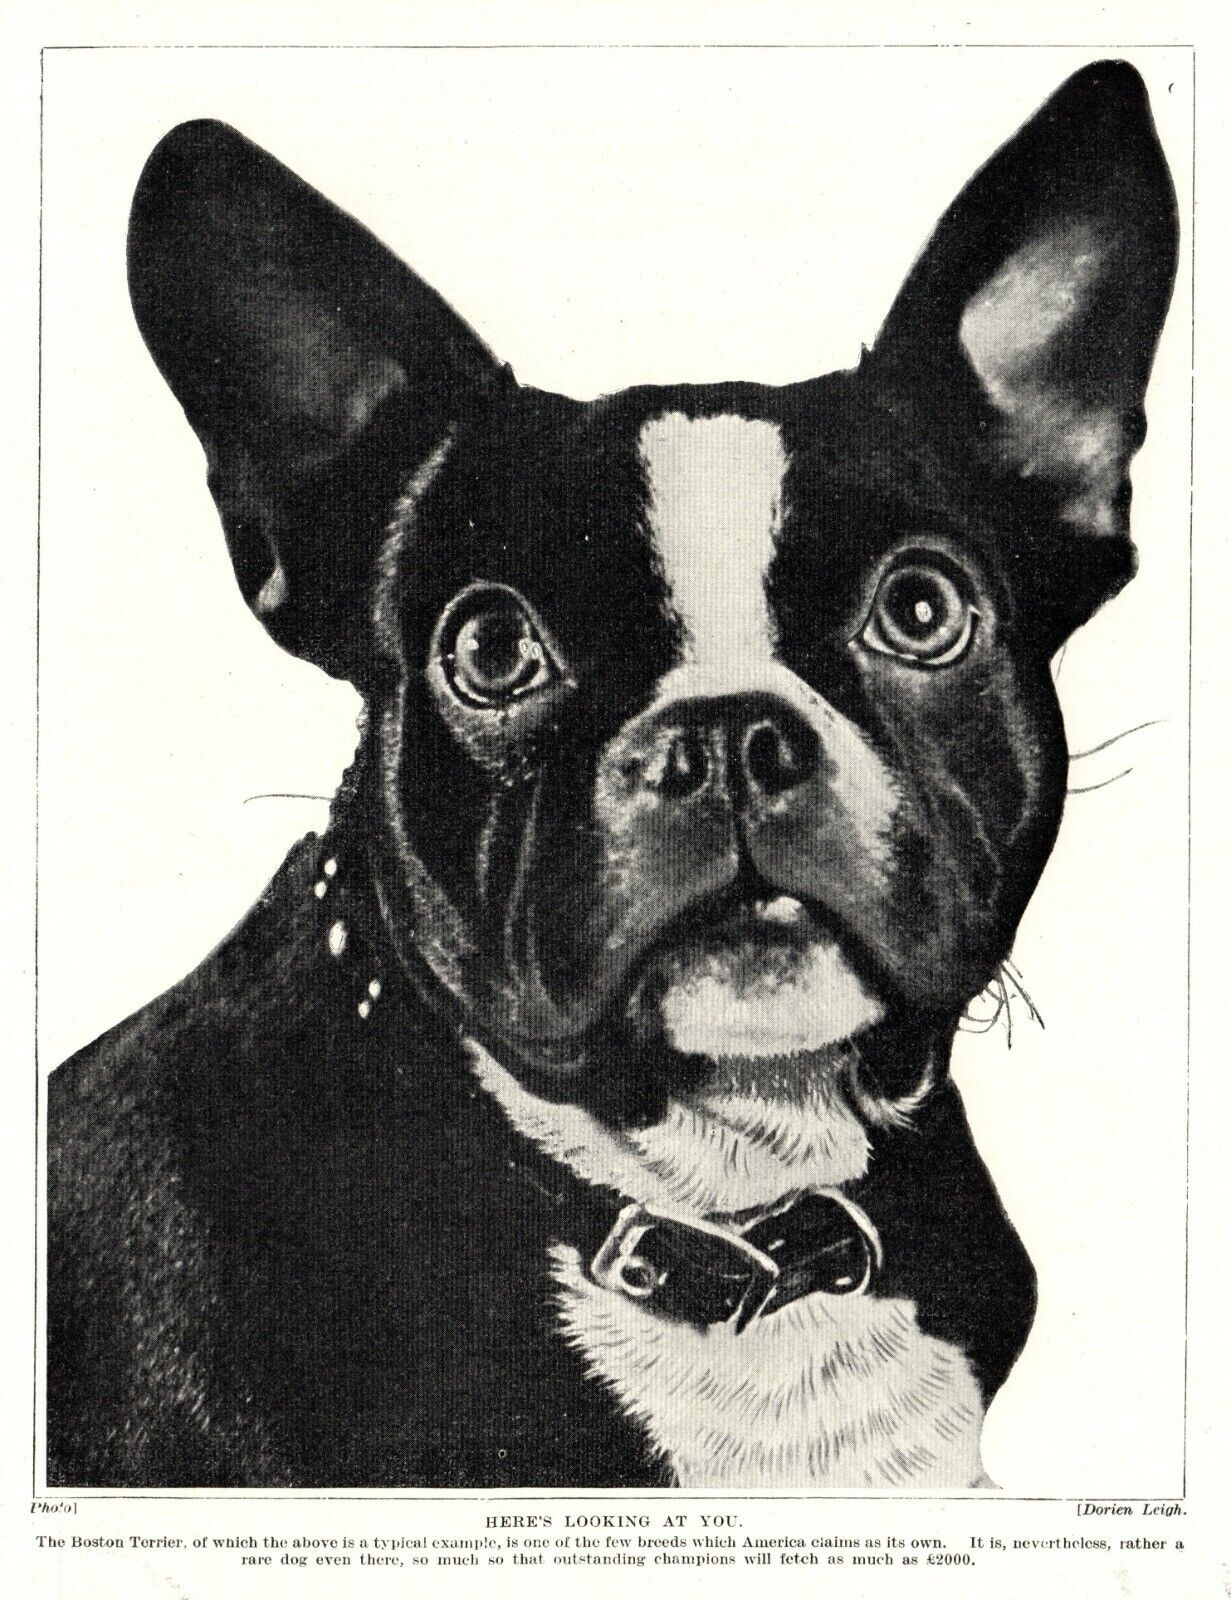 1930s Antique Boston Terrier Dog Print Heres Looking At You Dog Print 4265j